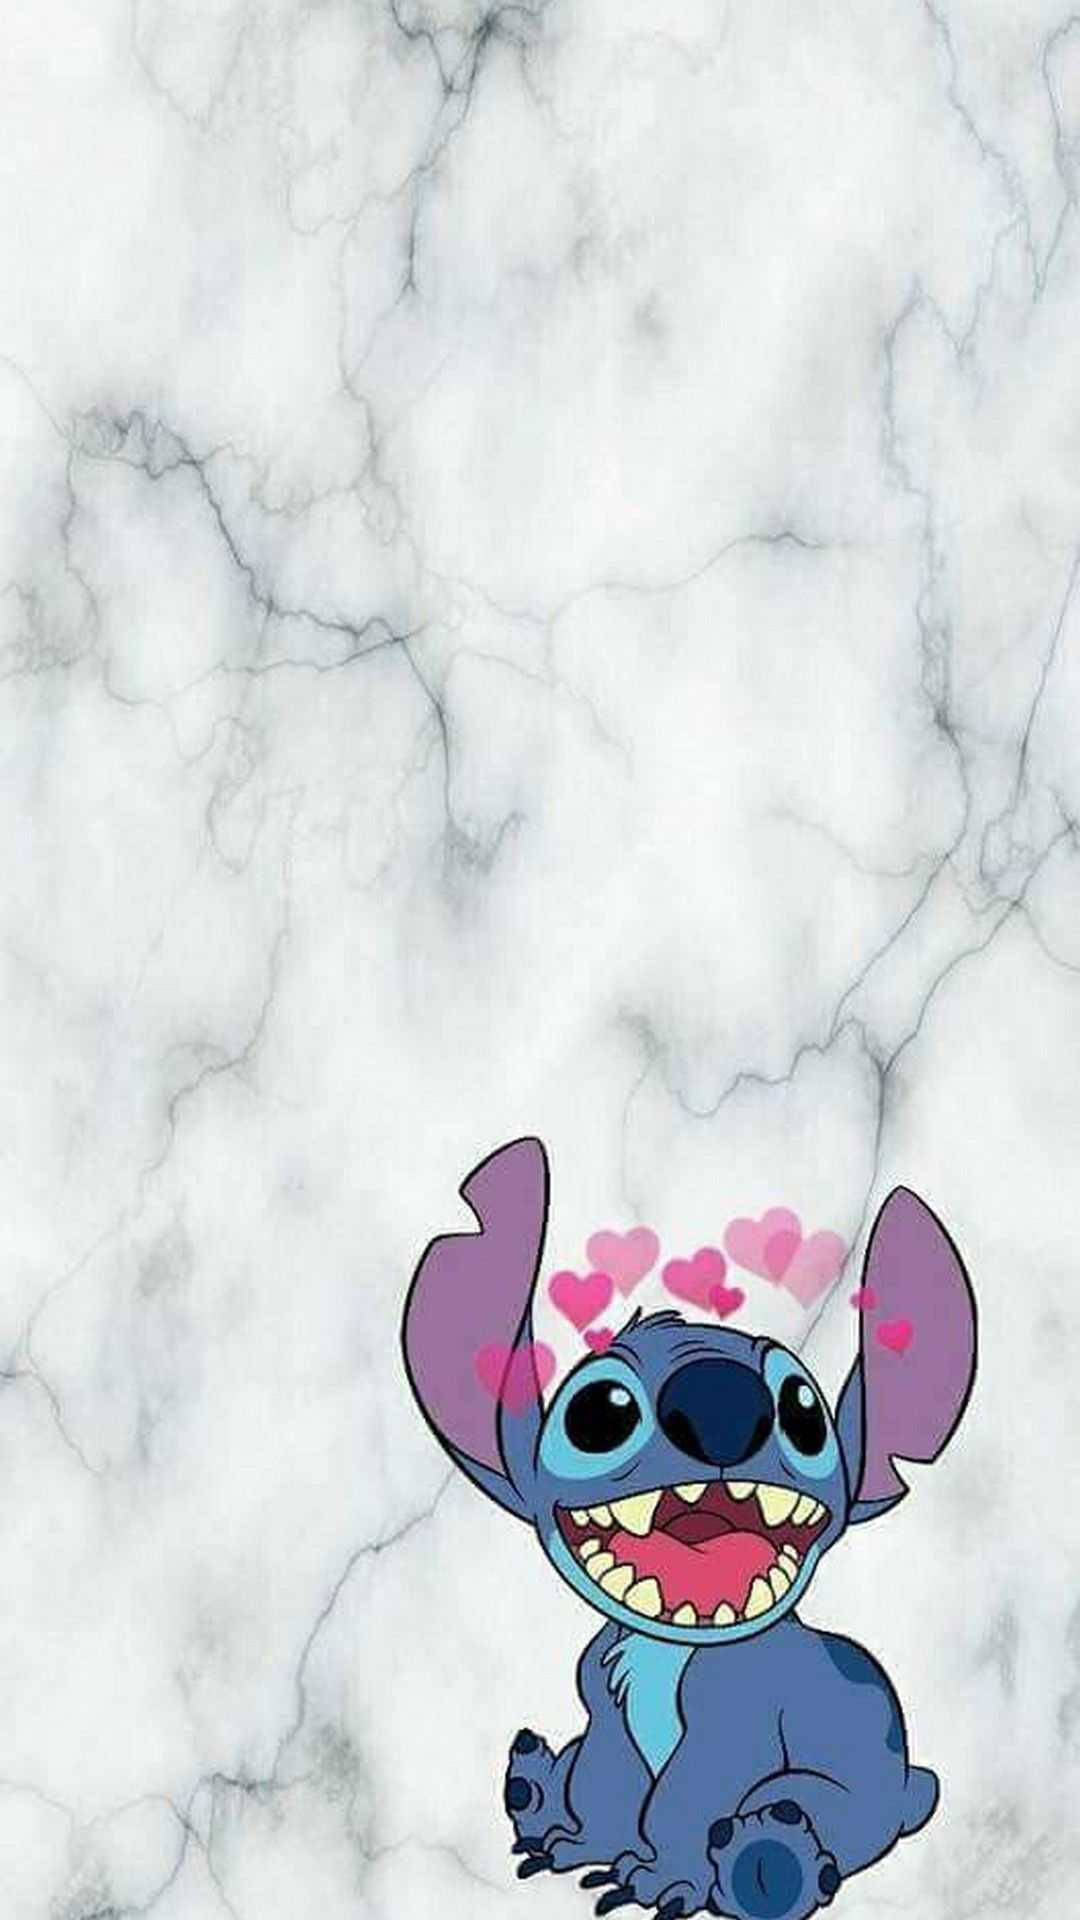 Cute Stitch With Pink Hearts Background